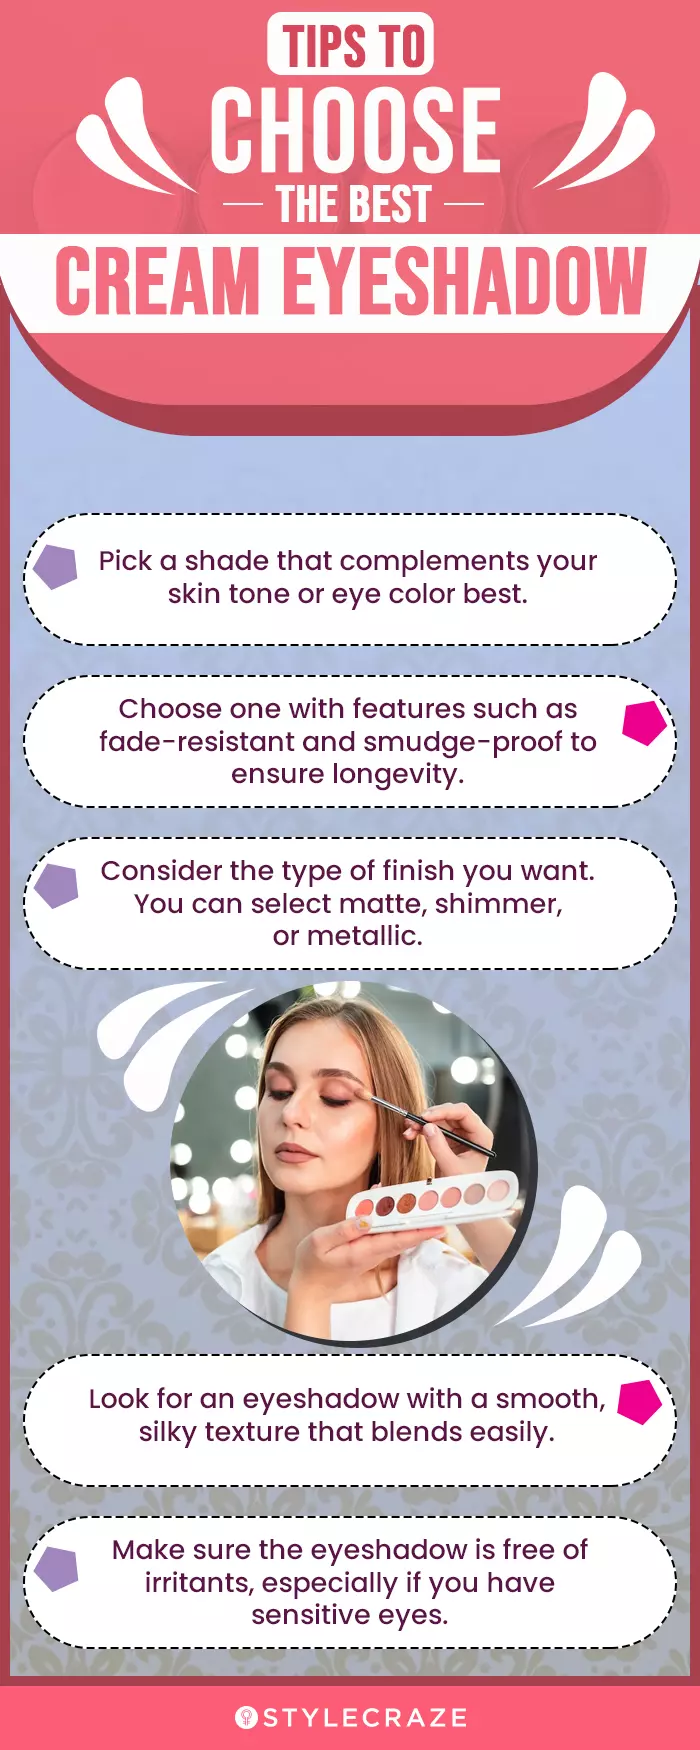 Tips To Choose The Best Cream Eyeshadow (infographic)